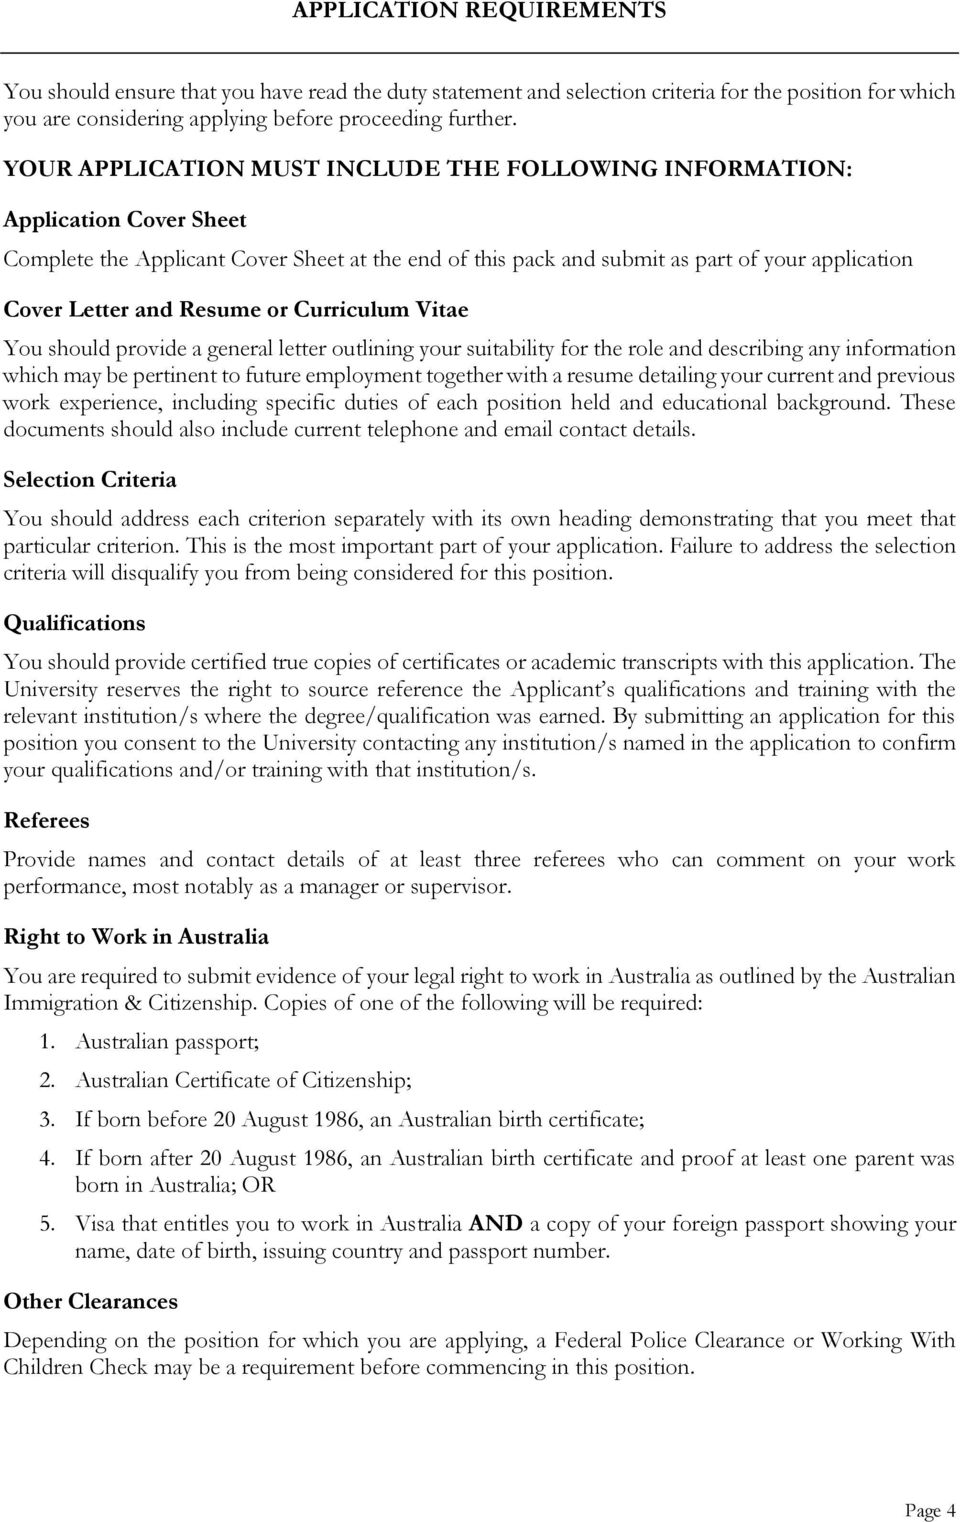 Resume or Curriculum Vitae You should provide a general letter outlining your suitability for the role and describing any information which may be pertinent to future employment together with a